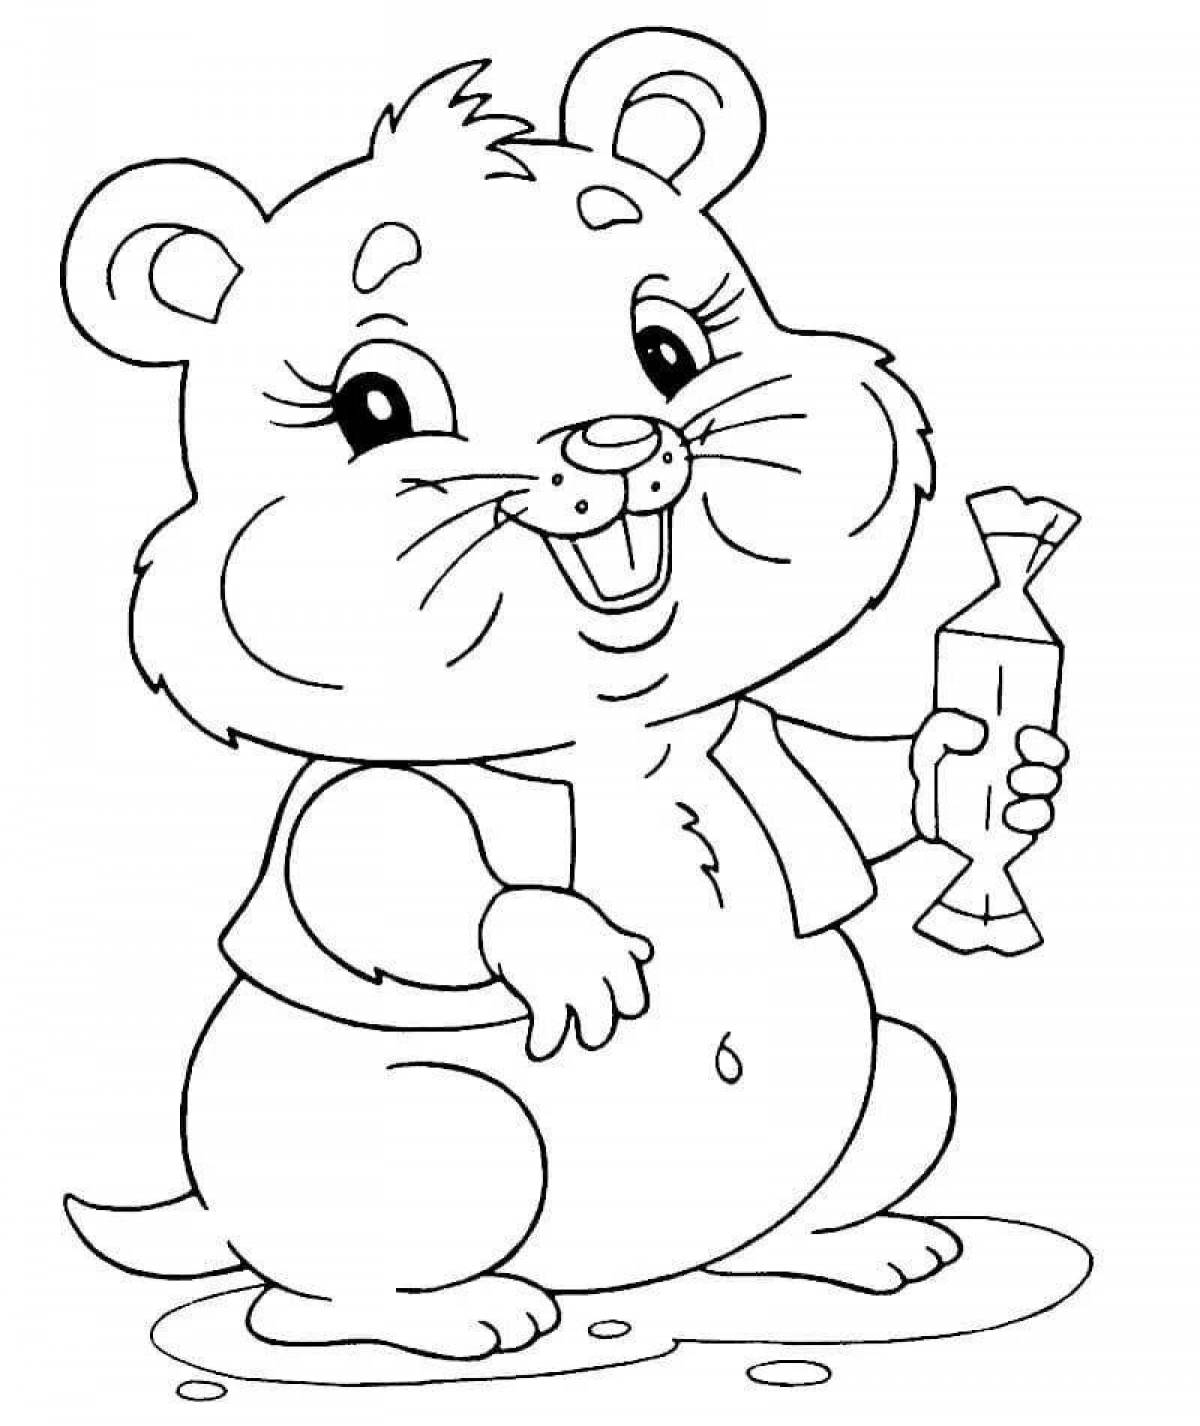 Rampant hamster coloring page